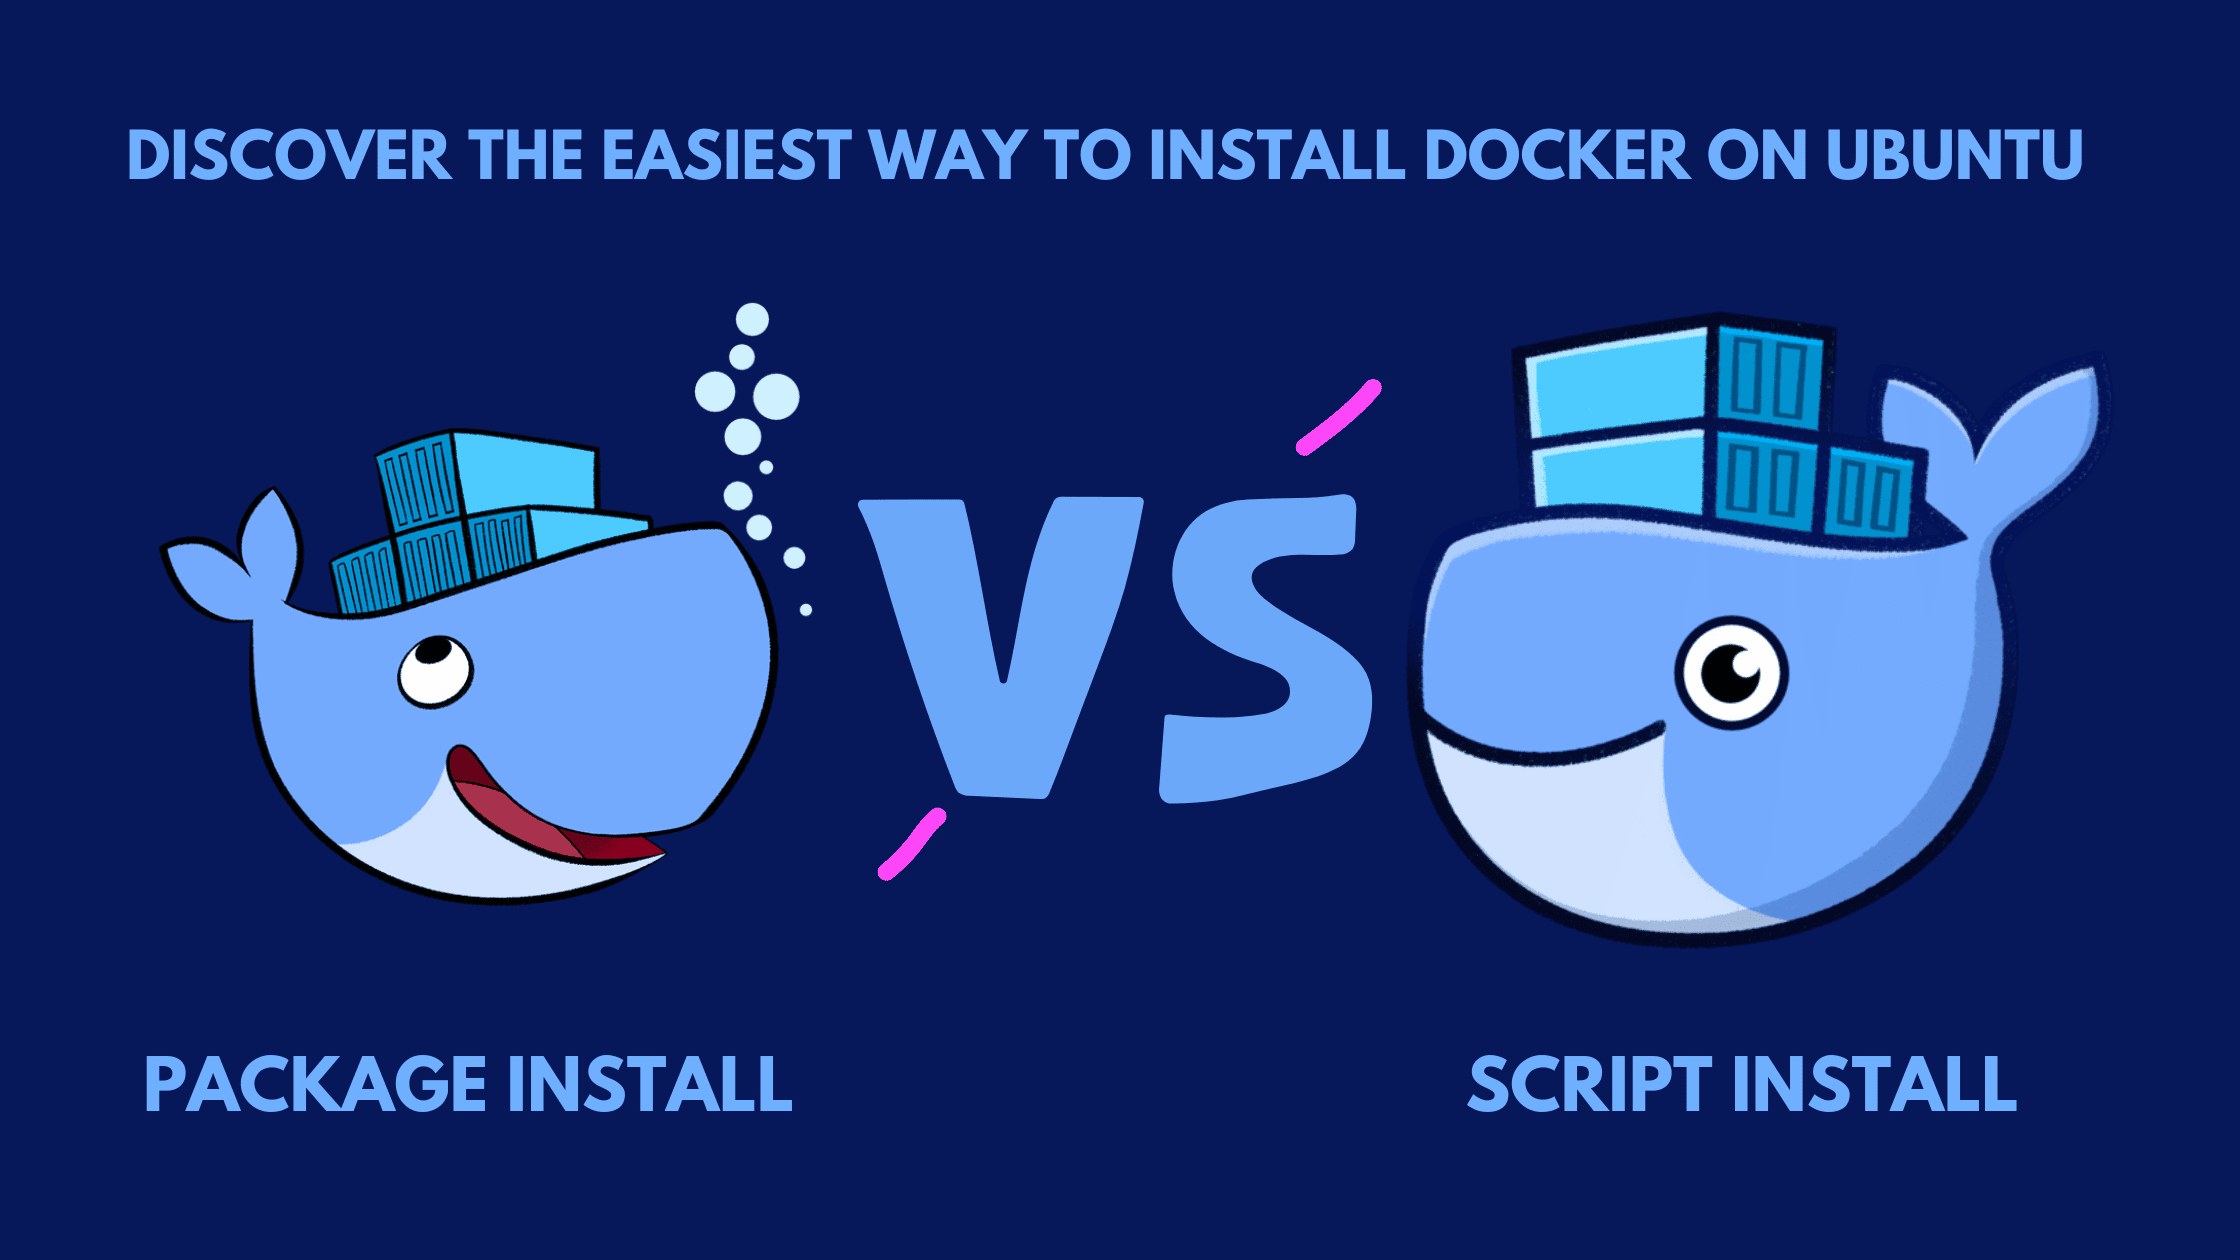 Discover The Easiest Way To Install Docker On Ubuntu With This Step By Step Guide